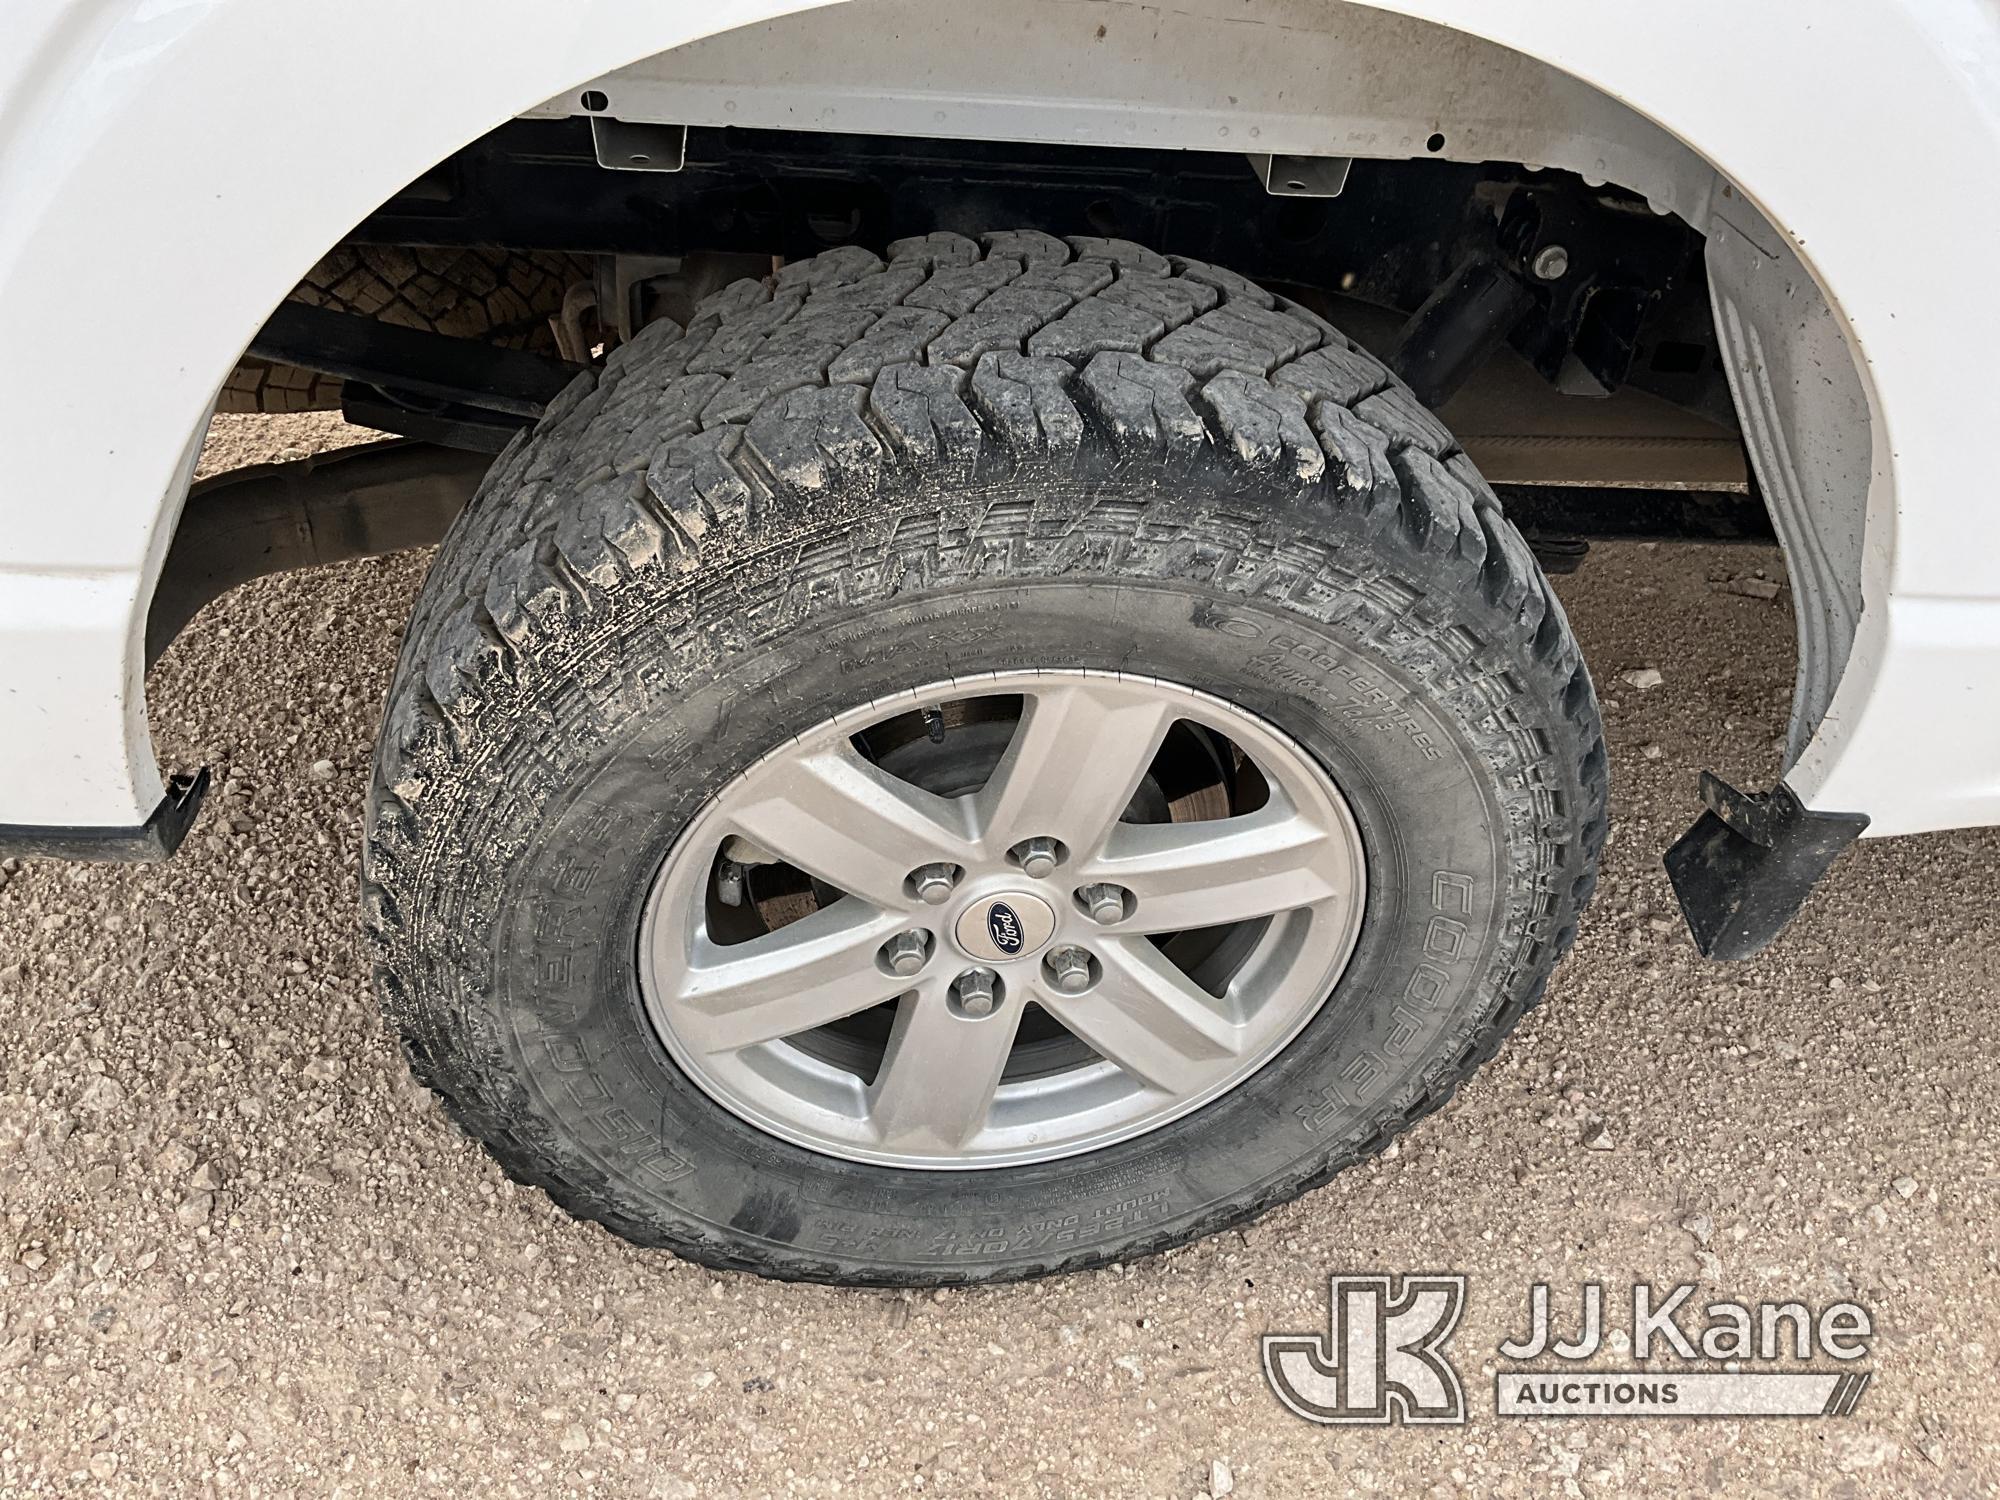 (Odessa, TX) 2021 Ford F150 4x4 Extended-Cab Pickup Truck Runs & Moves) (Hail & Paint Damage